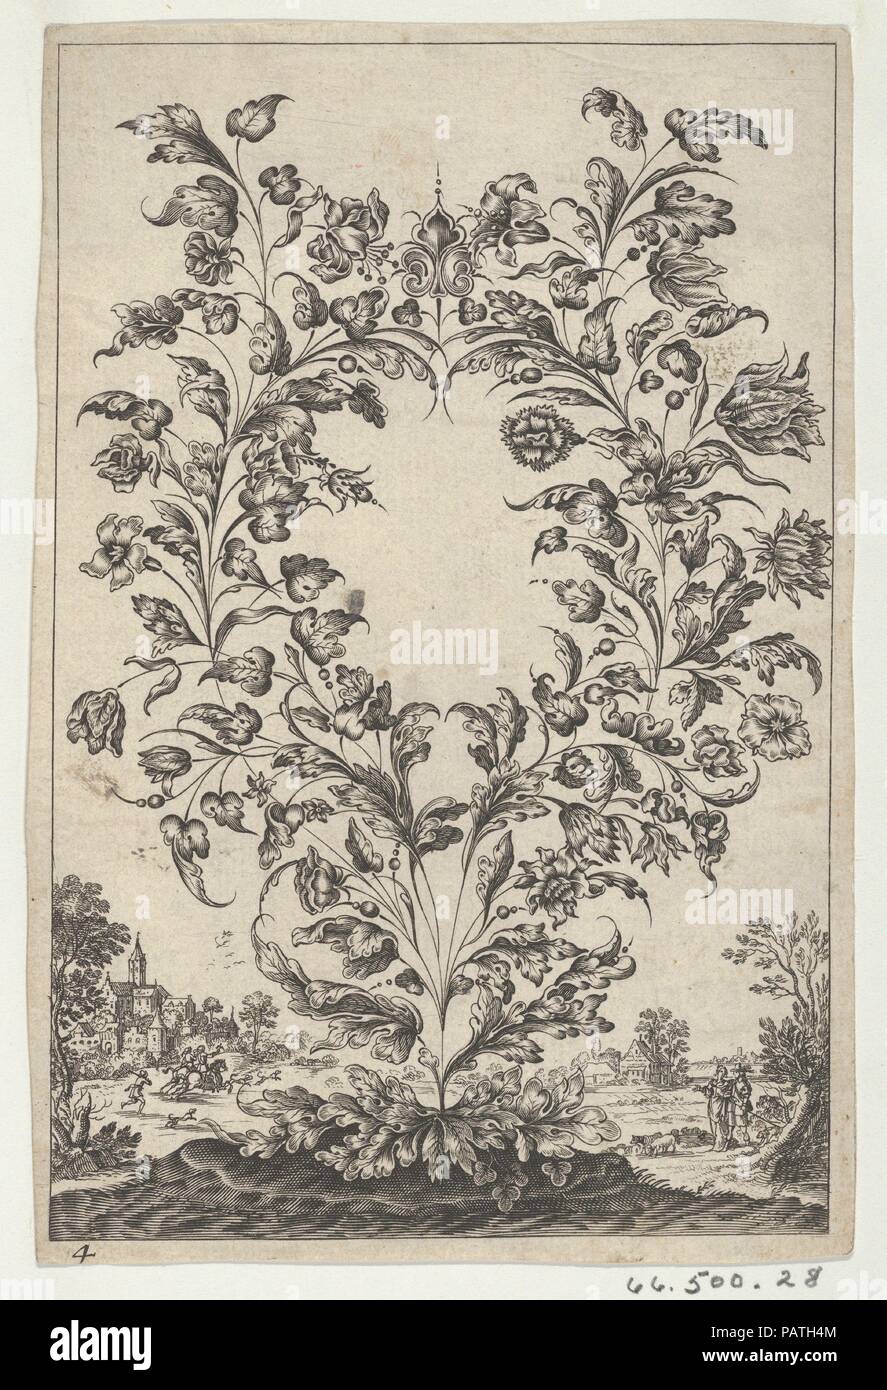 Ornament with Jewelry Design as Decorative Floral Arrangement. Artist: Anonymous, 17th century (in the style of Gédéon Légaré). Dimensions: Sheet: 6 1/4 × 4 1/2 in. (15.9 × 11.5 cm). Date: 17th century.  Decorative floral arrangement in an oval shape growing from the soil at center. At right, a strolling couple with dogs. At left, falconers on horseback in front of a townscape. Museum: Metropolitan Museum of Art, New York, USA. Stock Photo